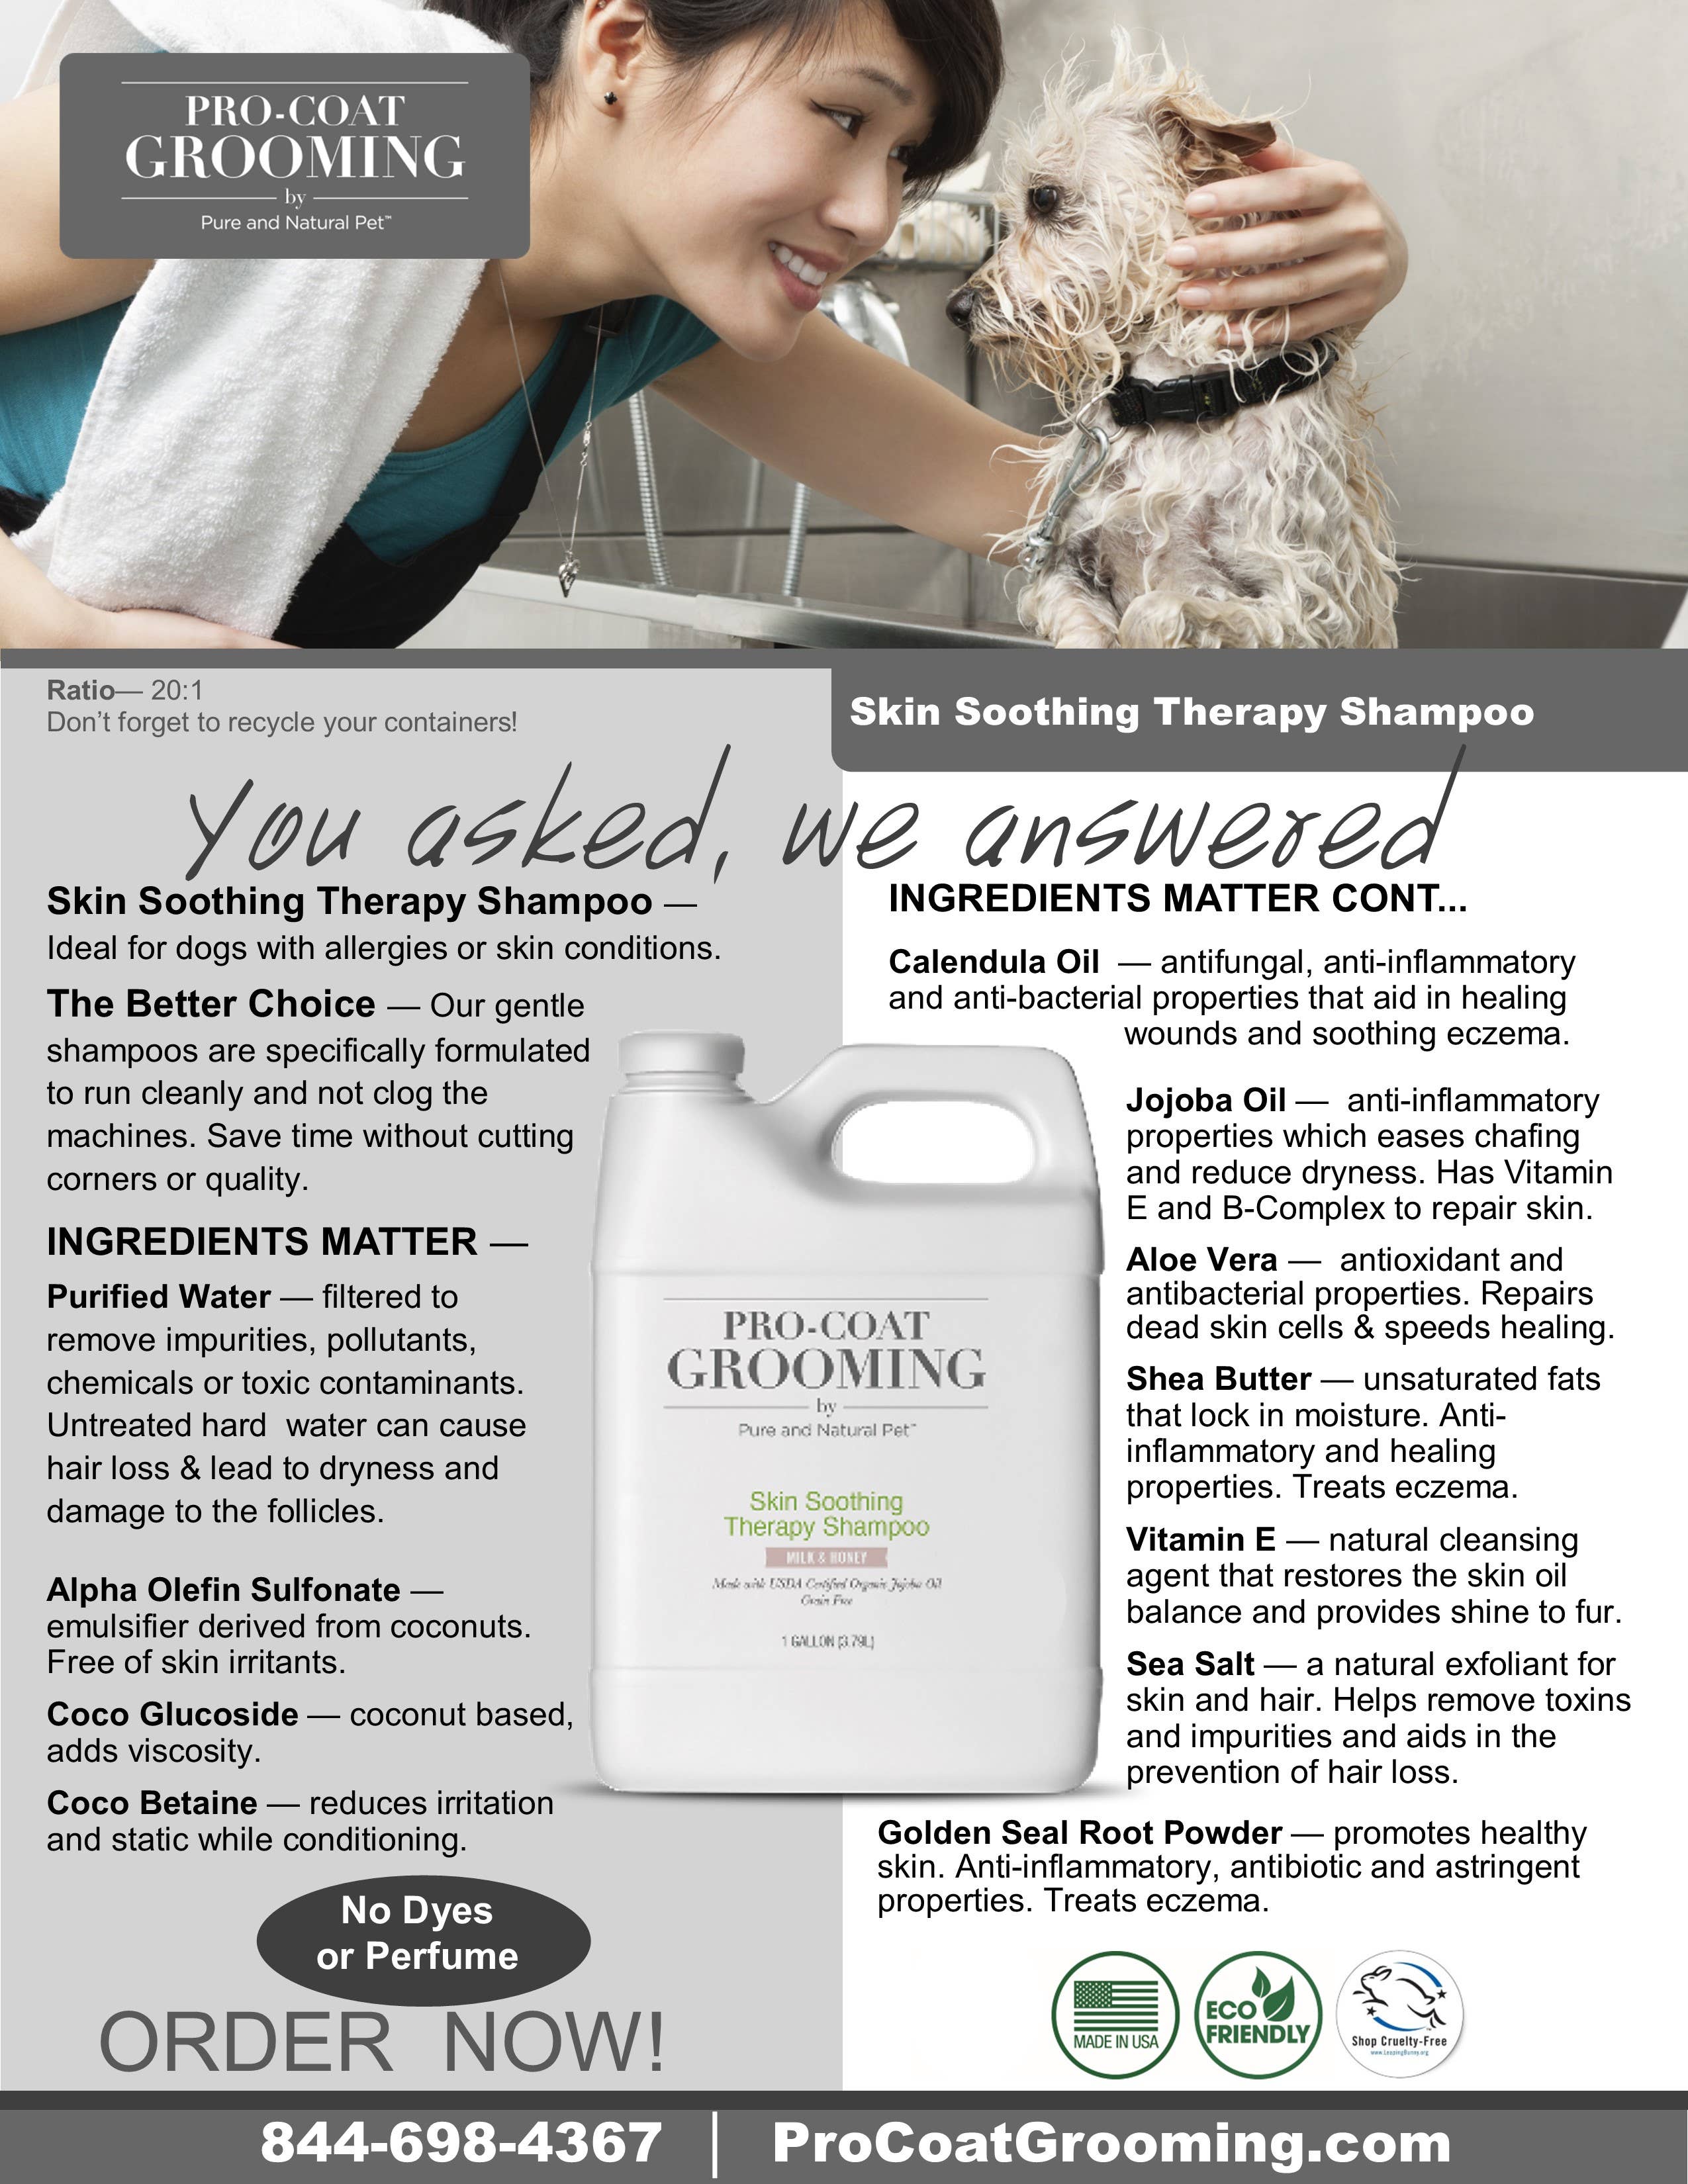 Pure and Natural Pet - Skin Soothing Therapy Shampoo for Dogs - 1 Gallon